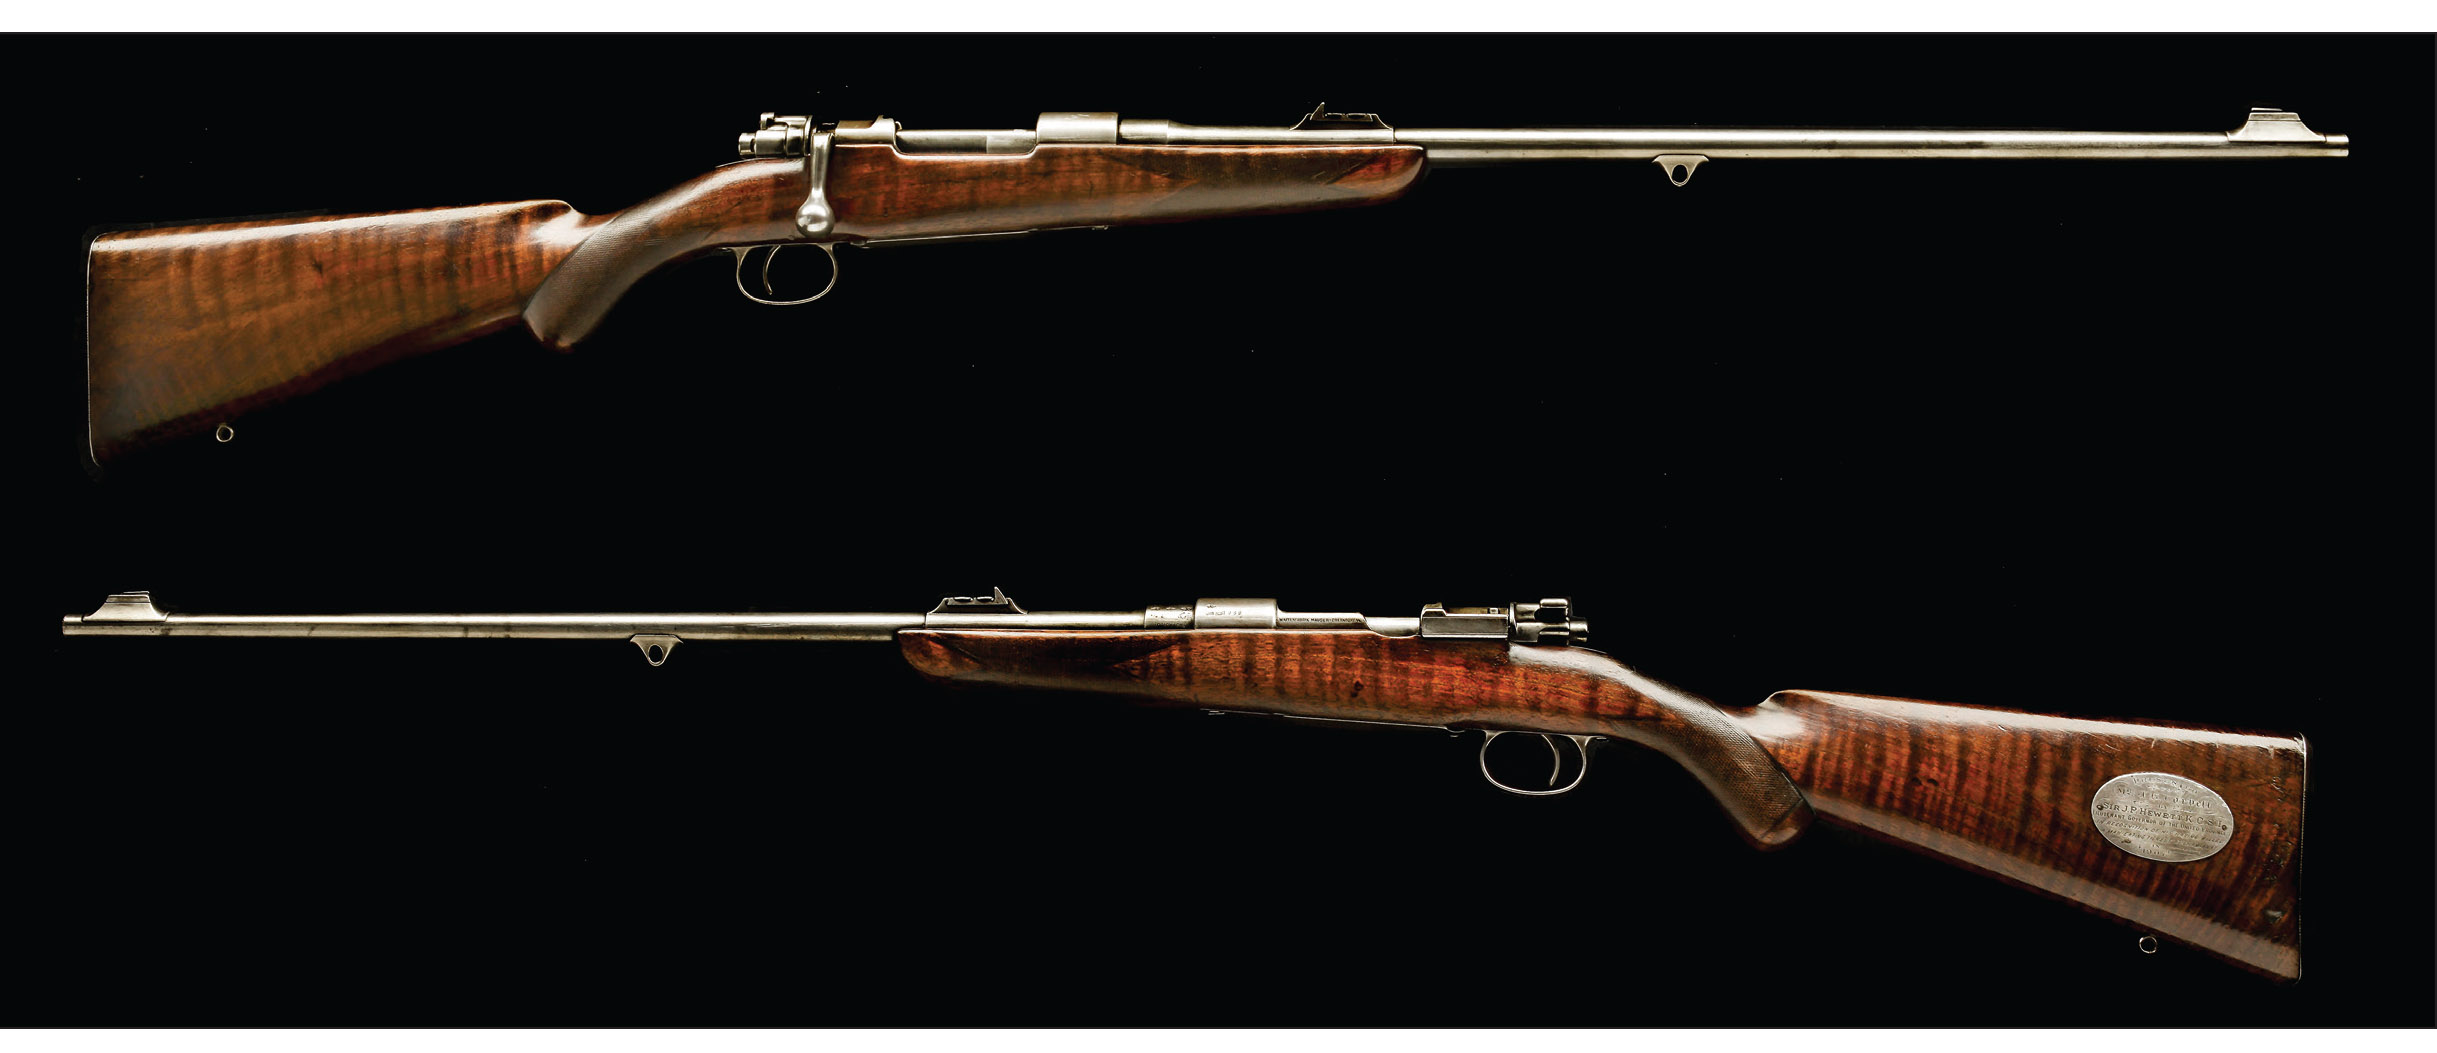 This rifle, by John Rigby & Co., was presented to Jim Corbett by the governor of the United Provinces (India) after Corbett killed the Champawat Man-Eater in 1907. It is chambered in 275 Rigby (7x57). (Photo courtesy of John Rigby & Co.)